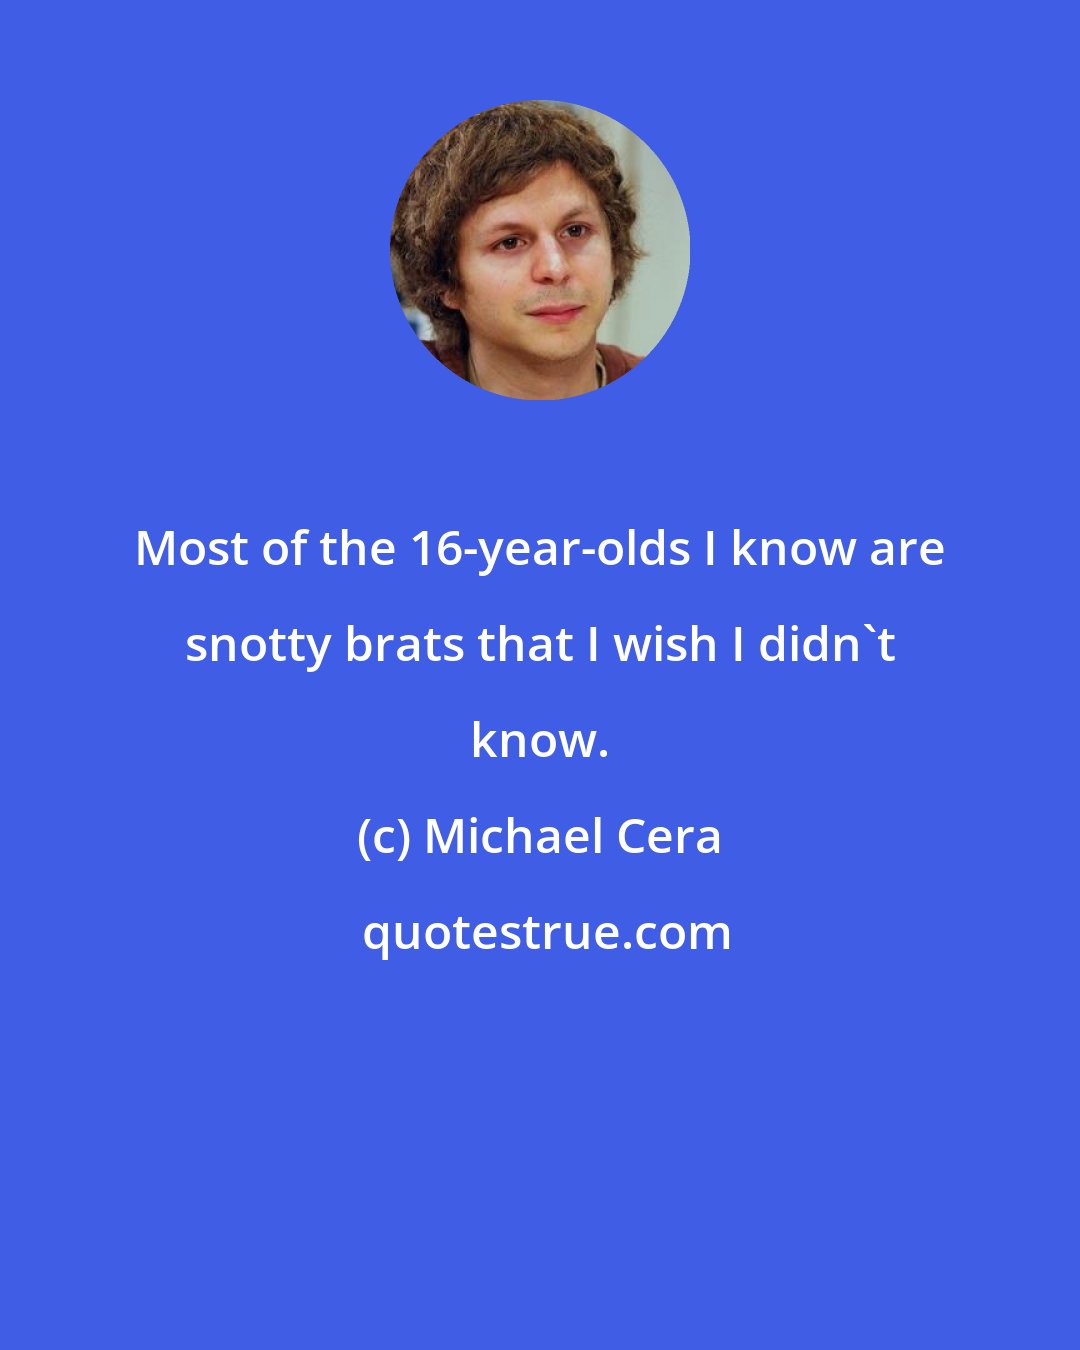 Michael Cera: Most of the 16-year-olds I know are snotty brats that I wish I didn't know.